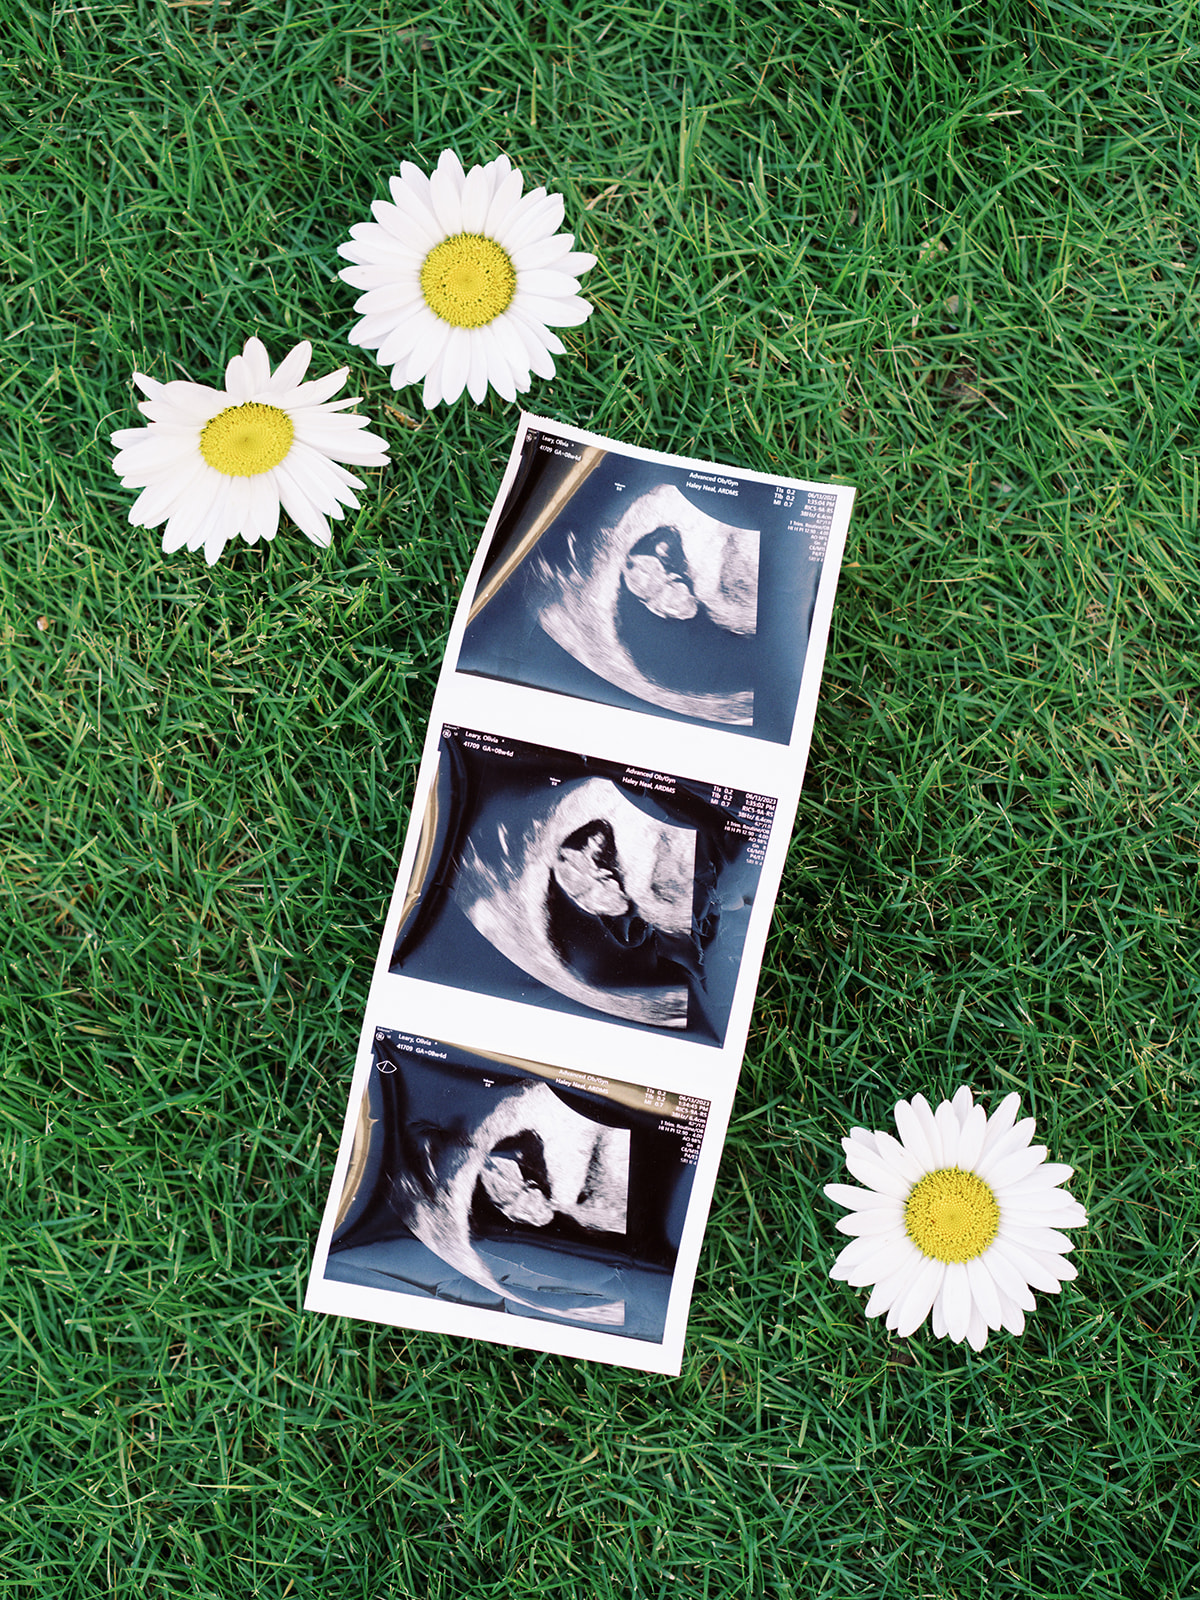 A few ultrasound snaps to announce a surprise pregnancy in a vibrant garden with flowers by Huntsville photographer